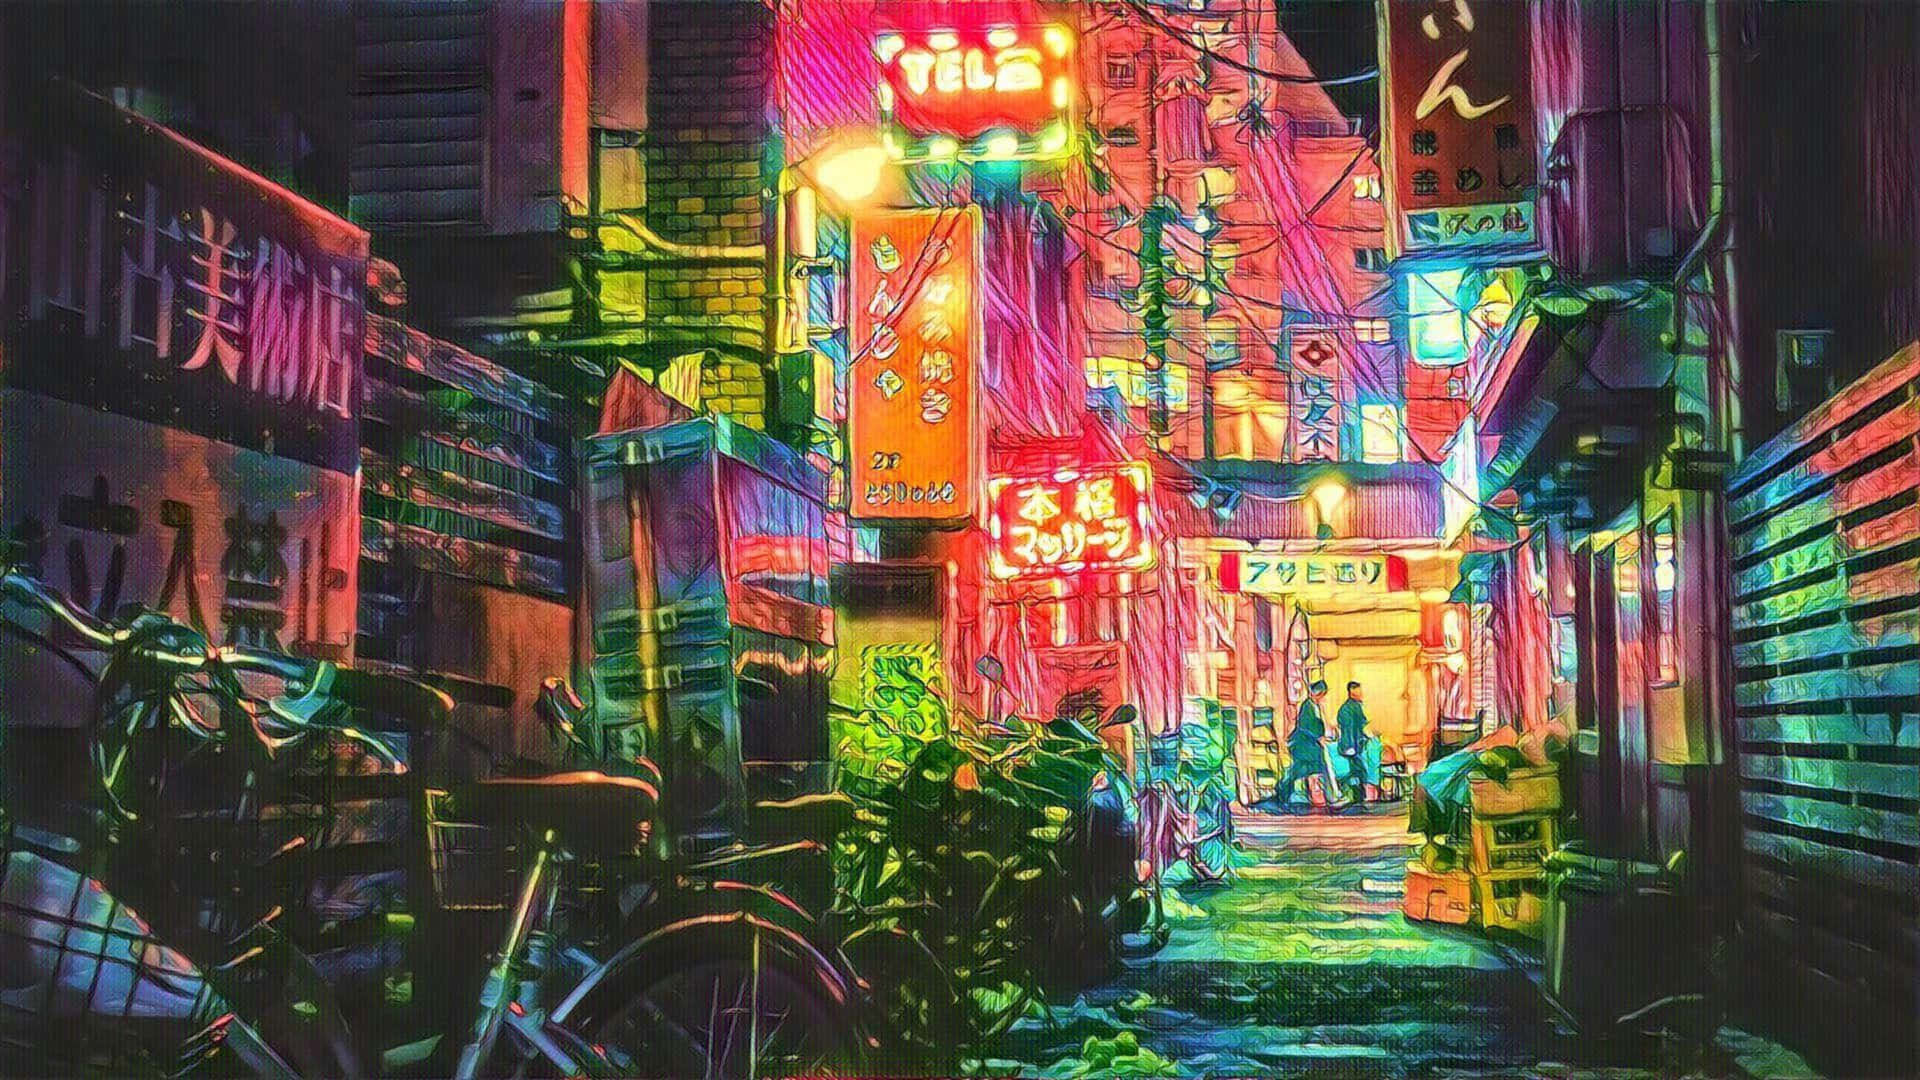 9 Anime Tokyo Wallpapers for iPhone and Android by Scott Martinez